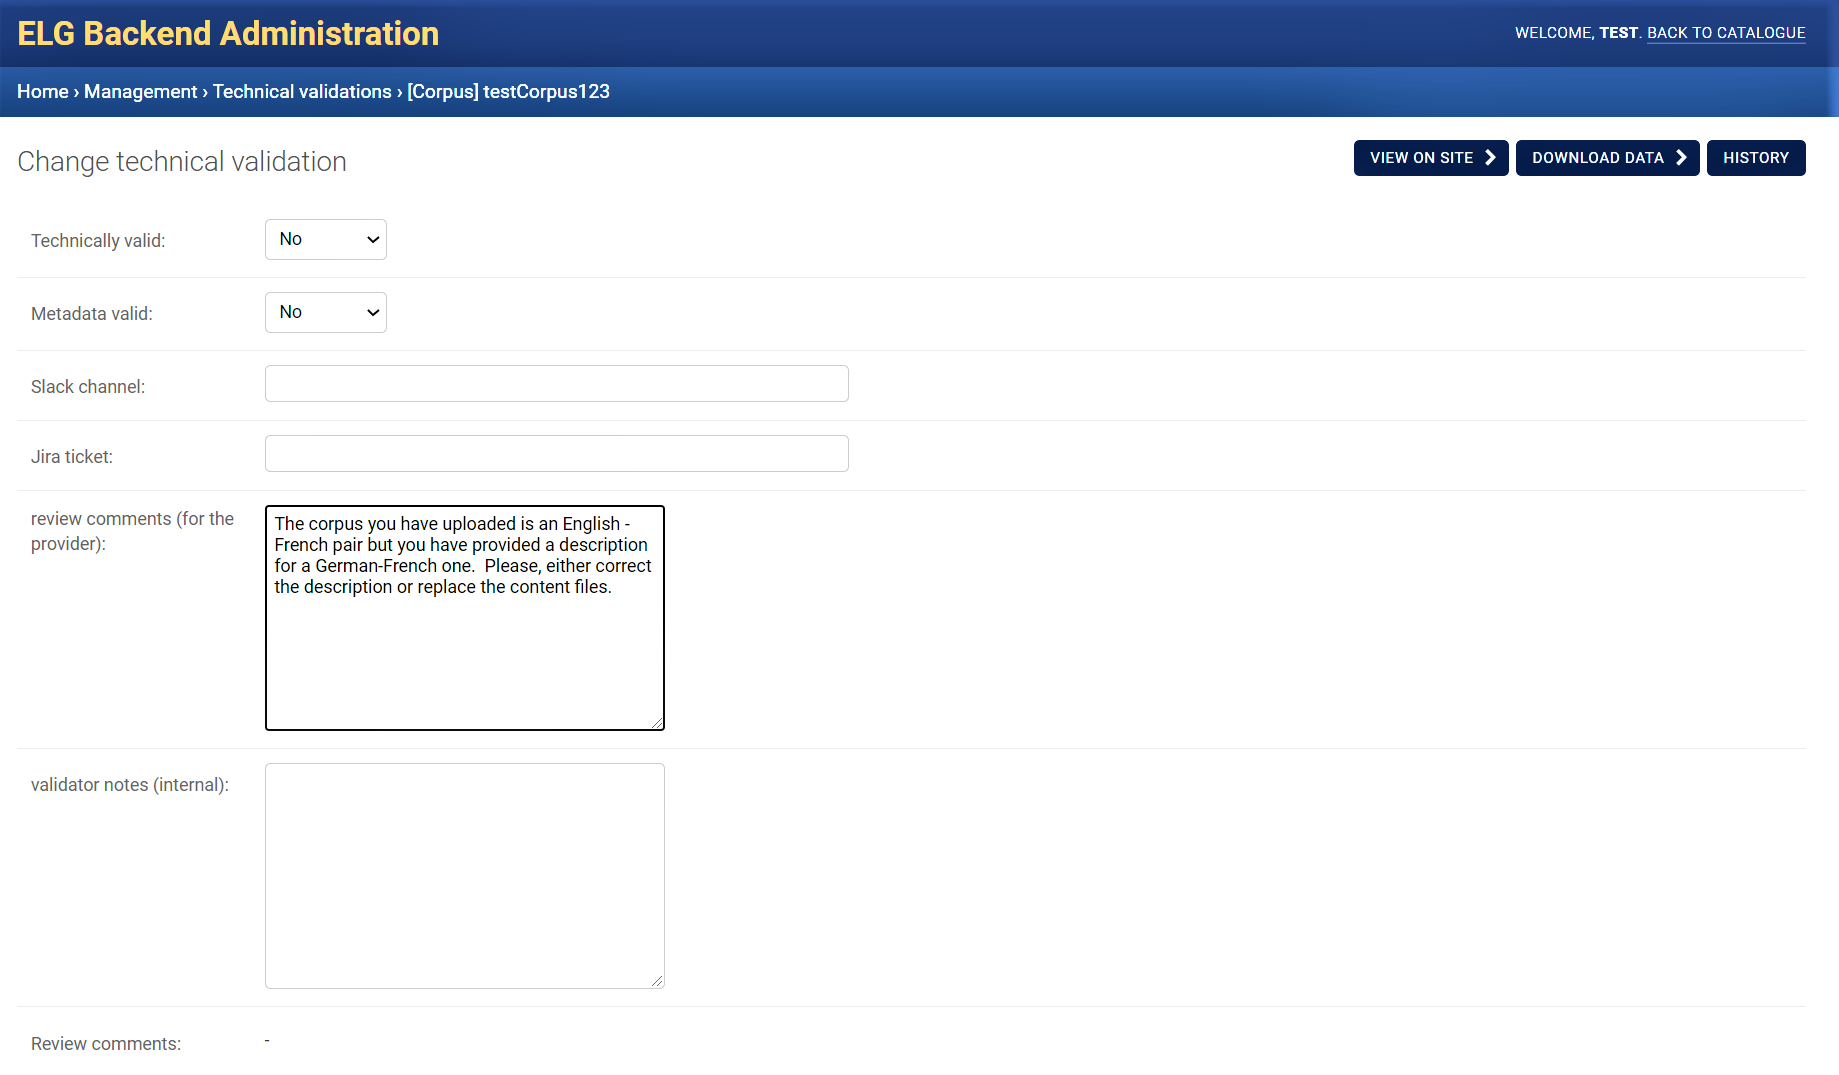 Technical validation form with review comments